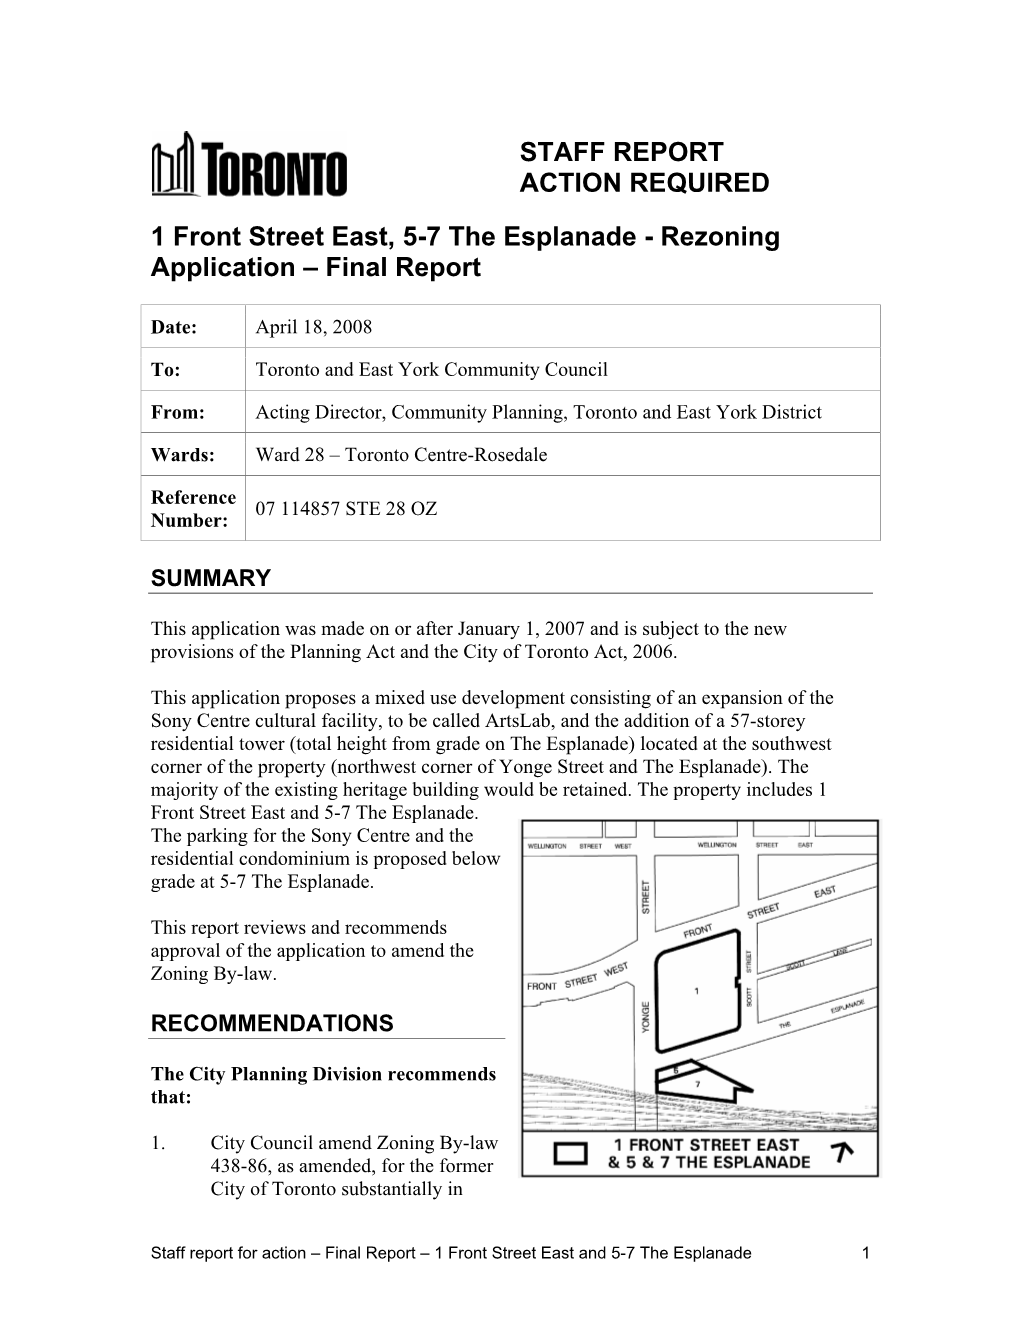 Rezoning Application-1 Front St E, 5-7 the Esplanade